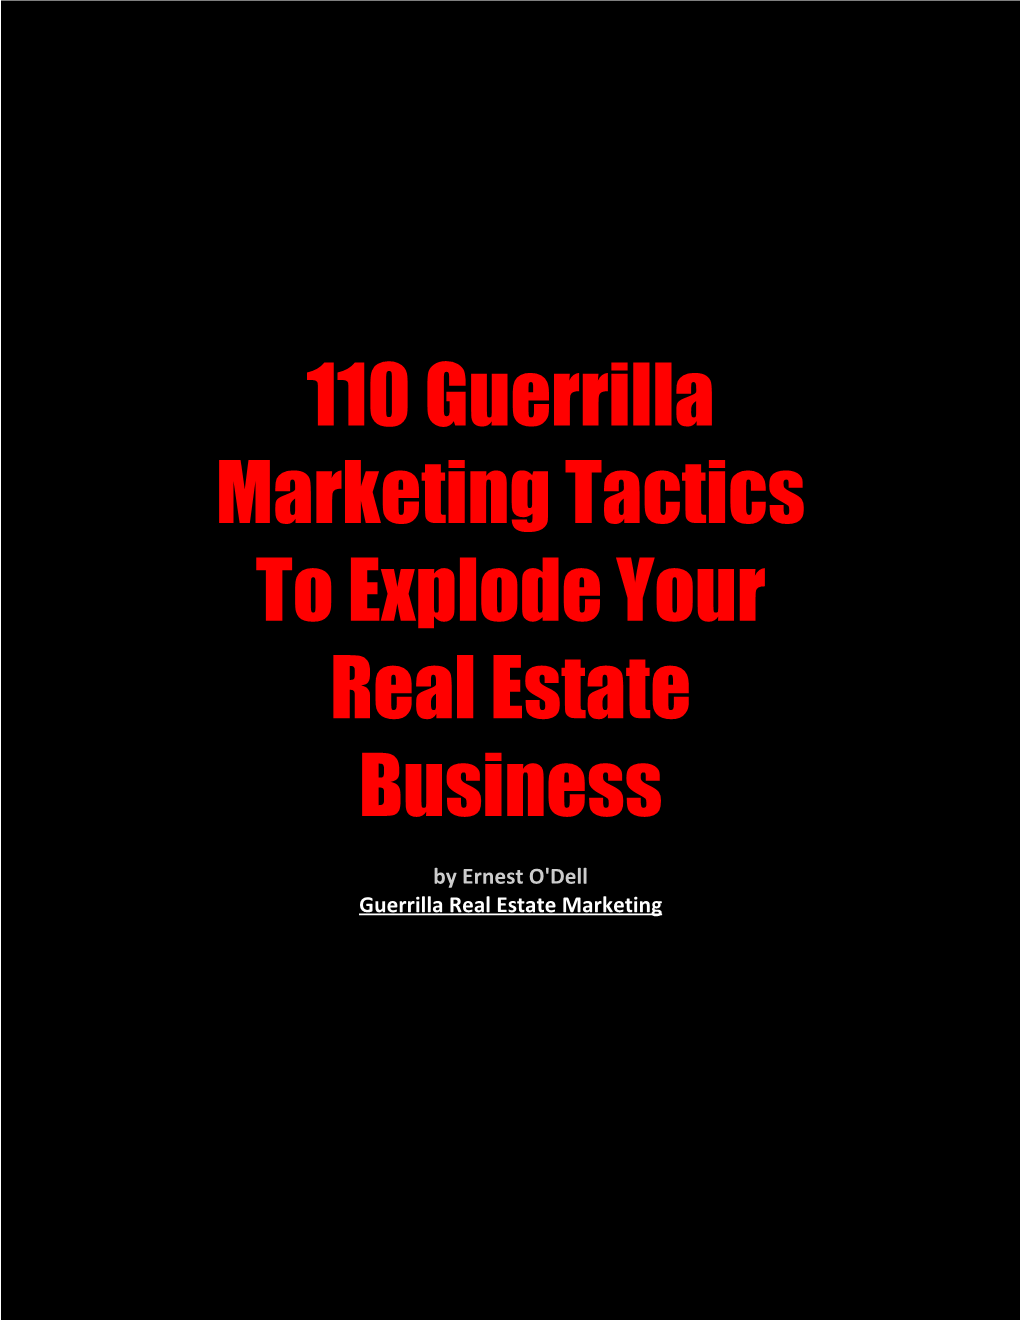 110 Guerrilla Marketing Tactics to Explode Your Real Estate Business